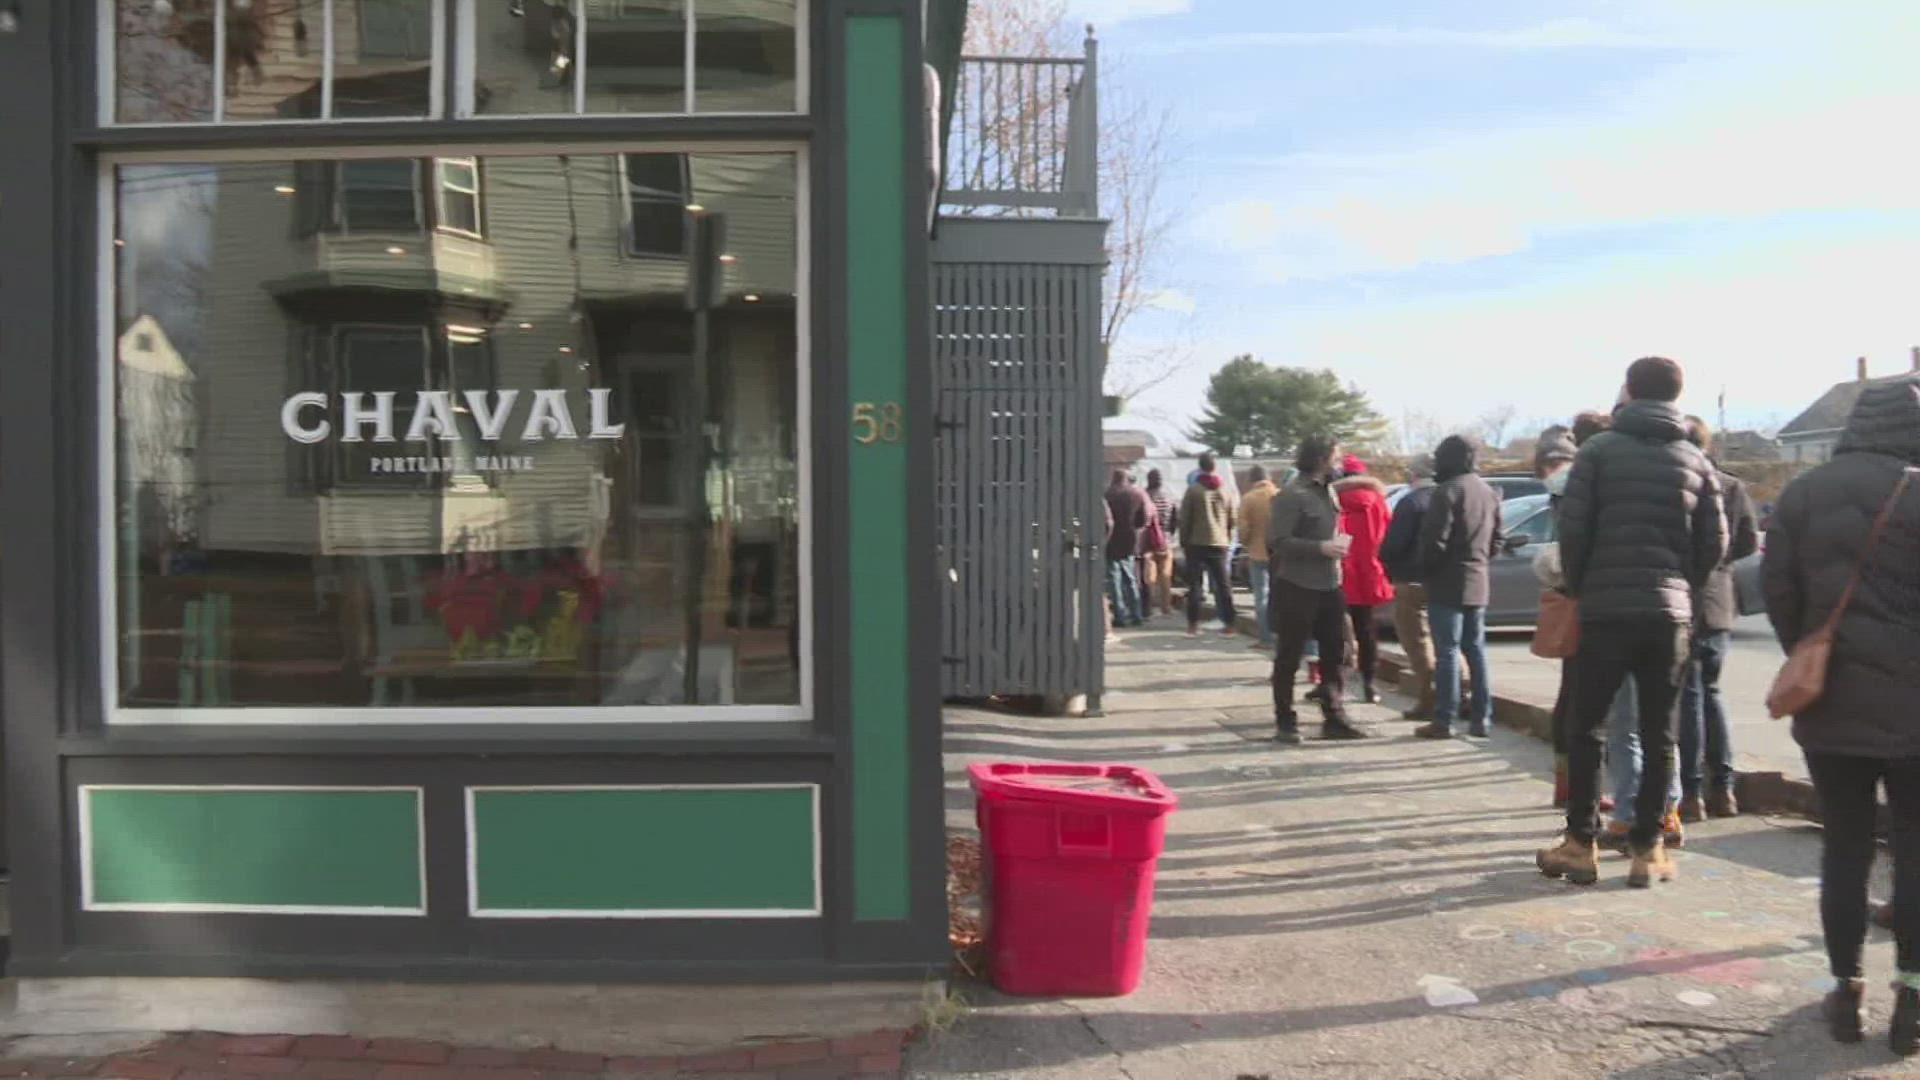 'Chaval' in Portland hosted a vaccine booster clinic on Sunday and plans to host another clinic next weekend.